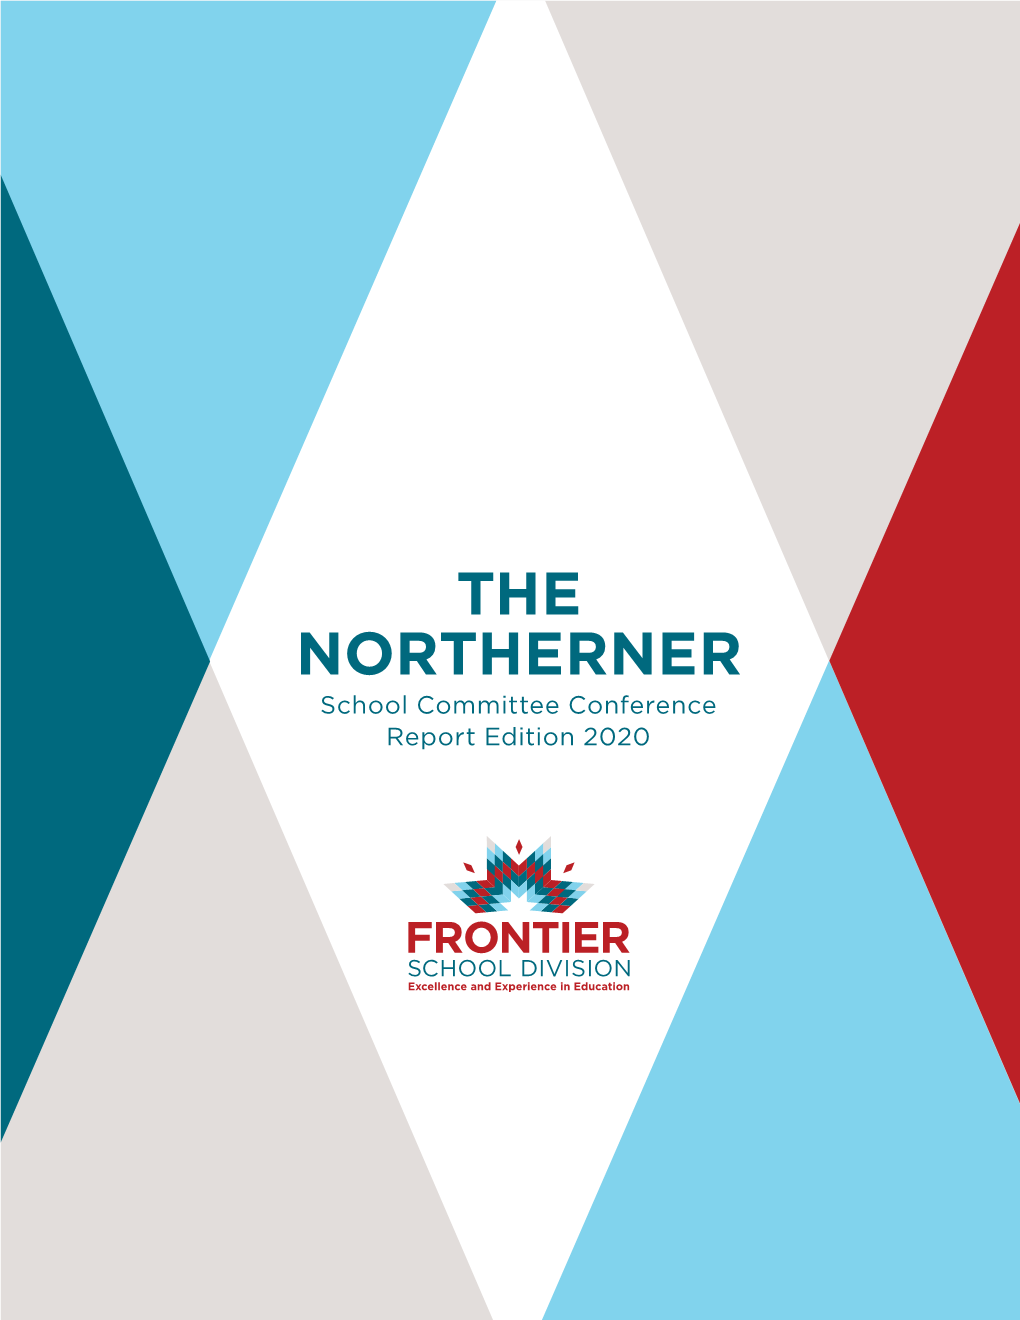 THE NORTHERNER School Committee Conference Report Edition 2020